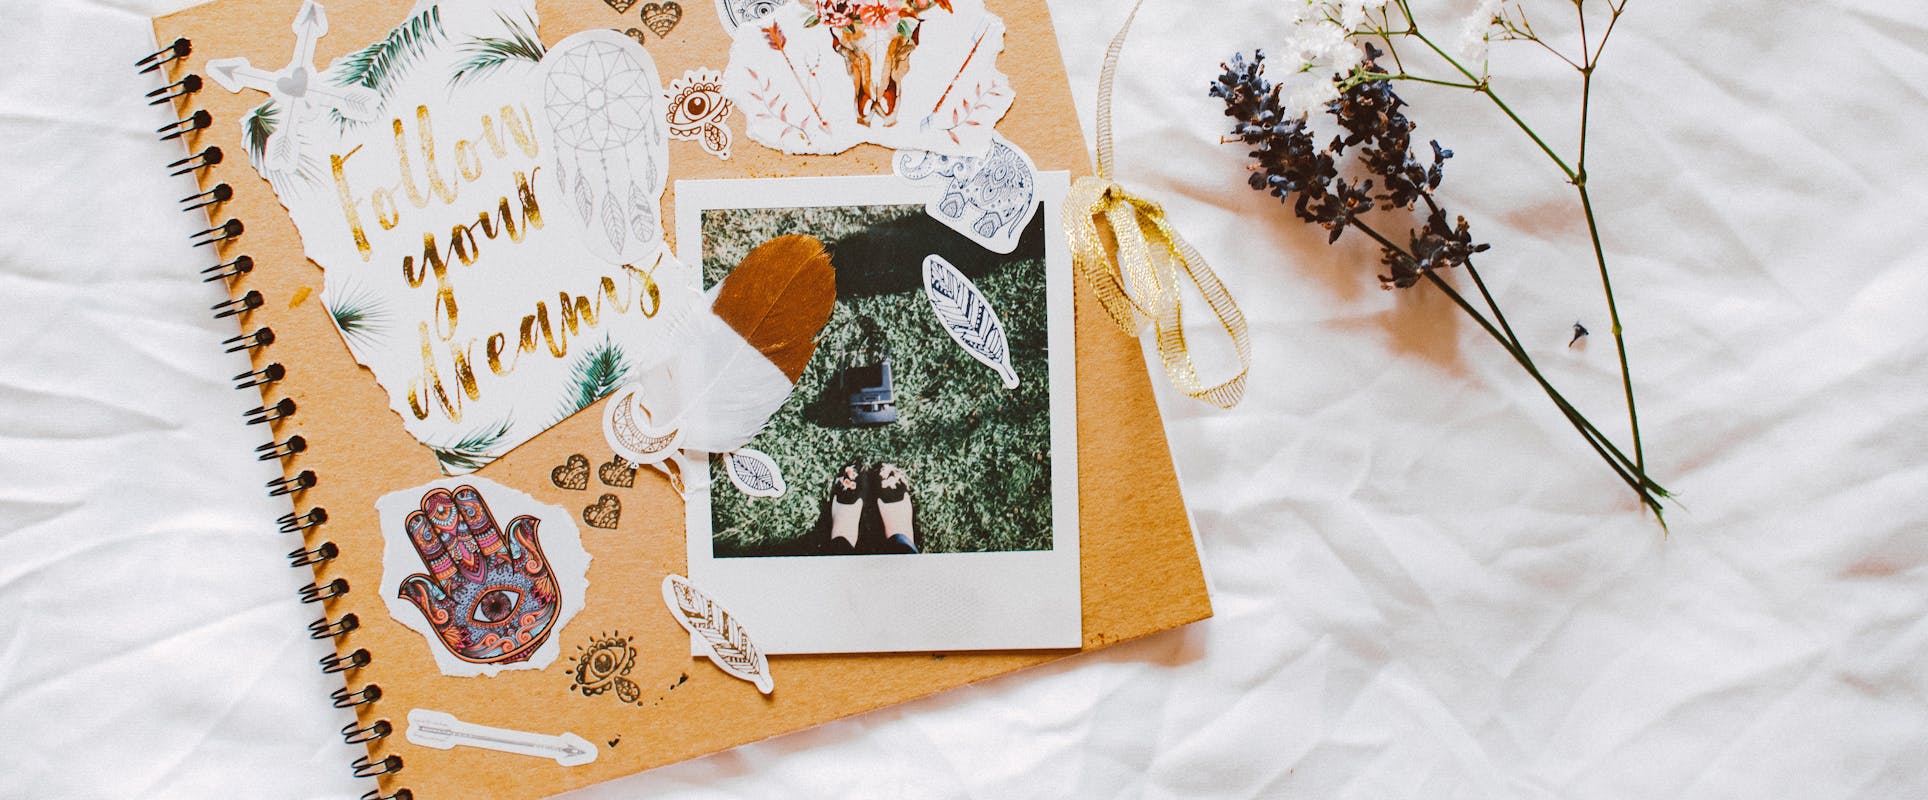 Easy scrapbook layout ideas to spark your imagination!